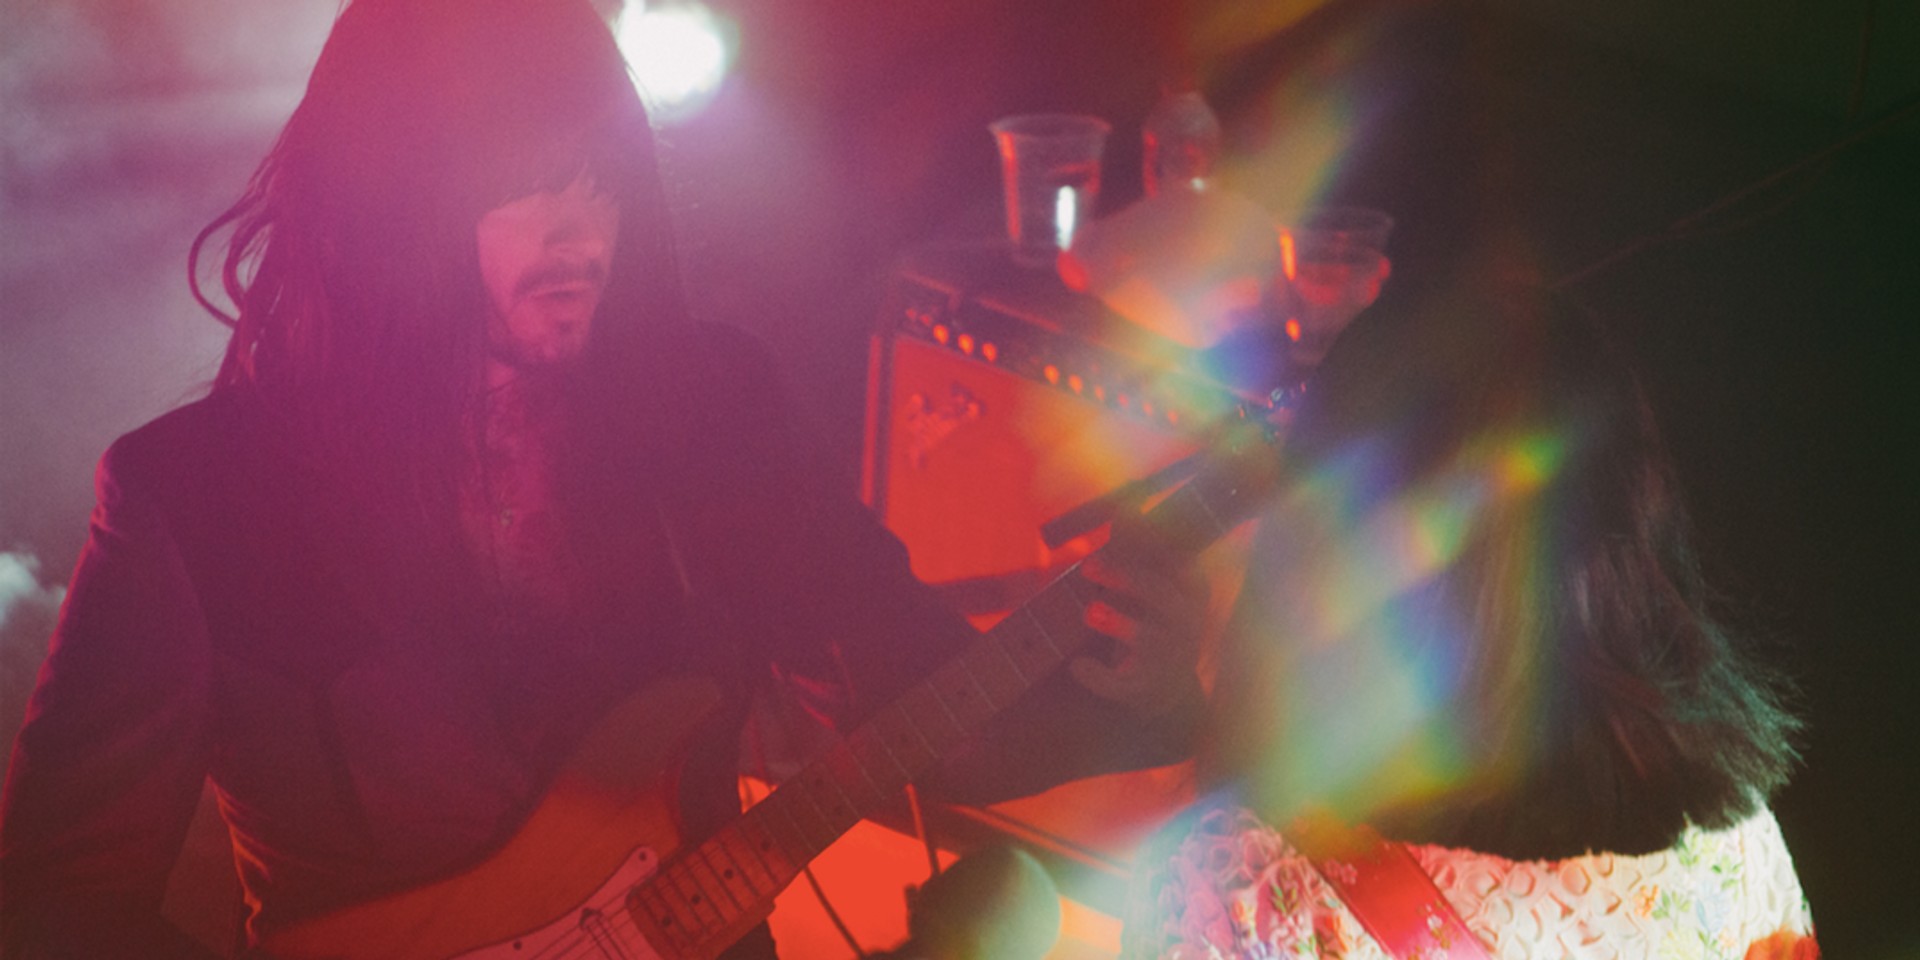 Khruangbin brings funk and good vibes to The Projector – gig report